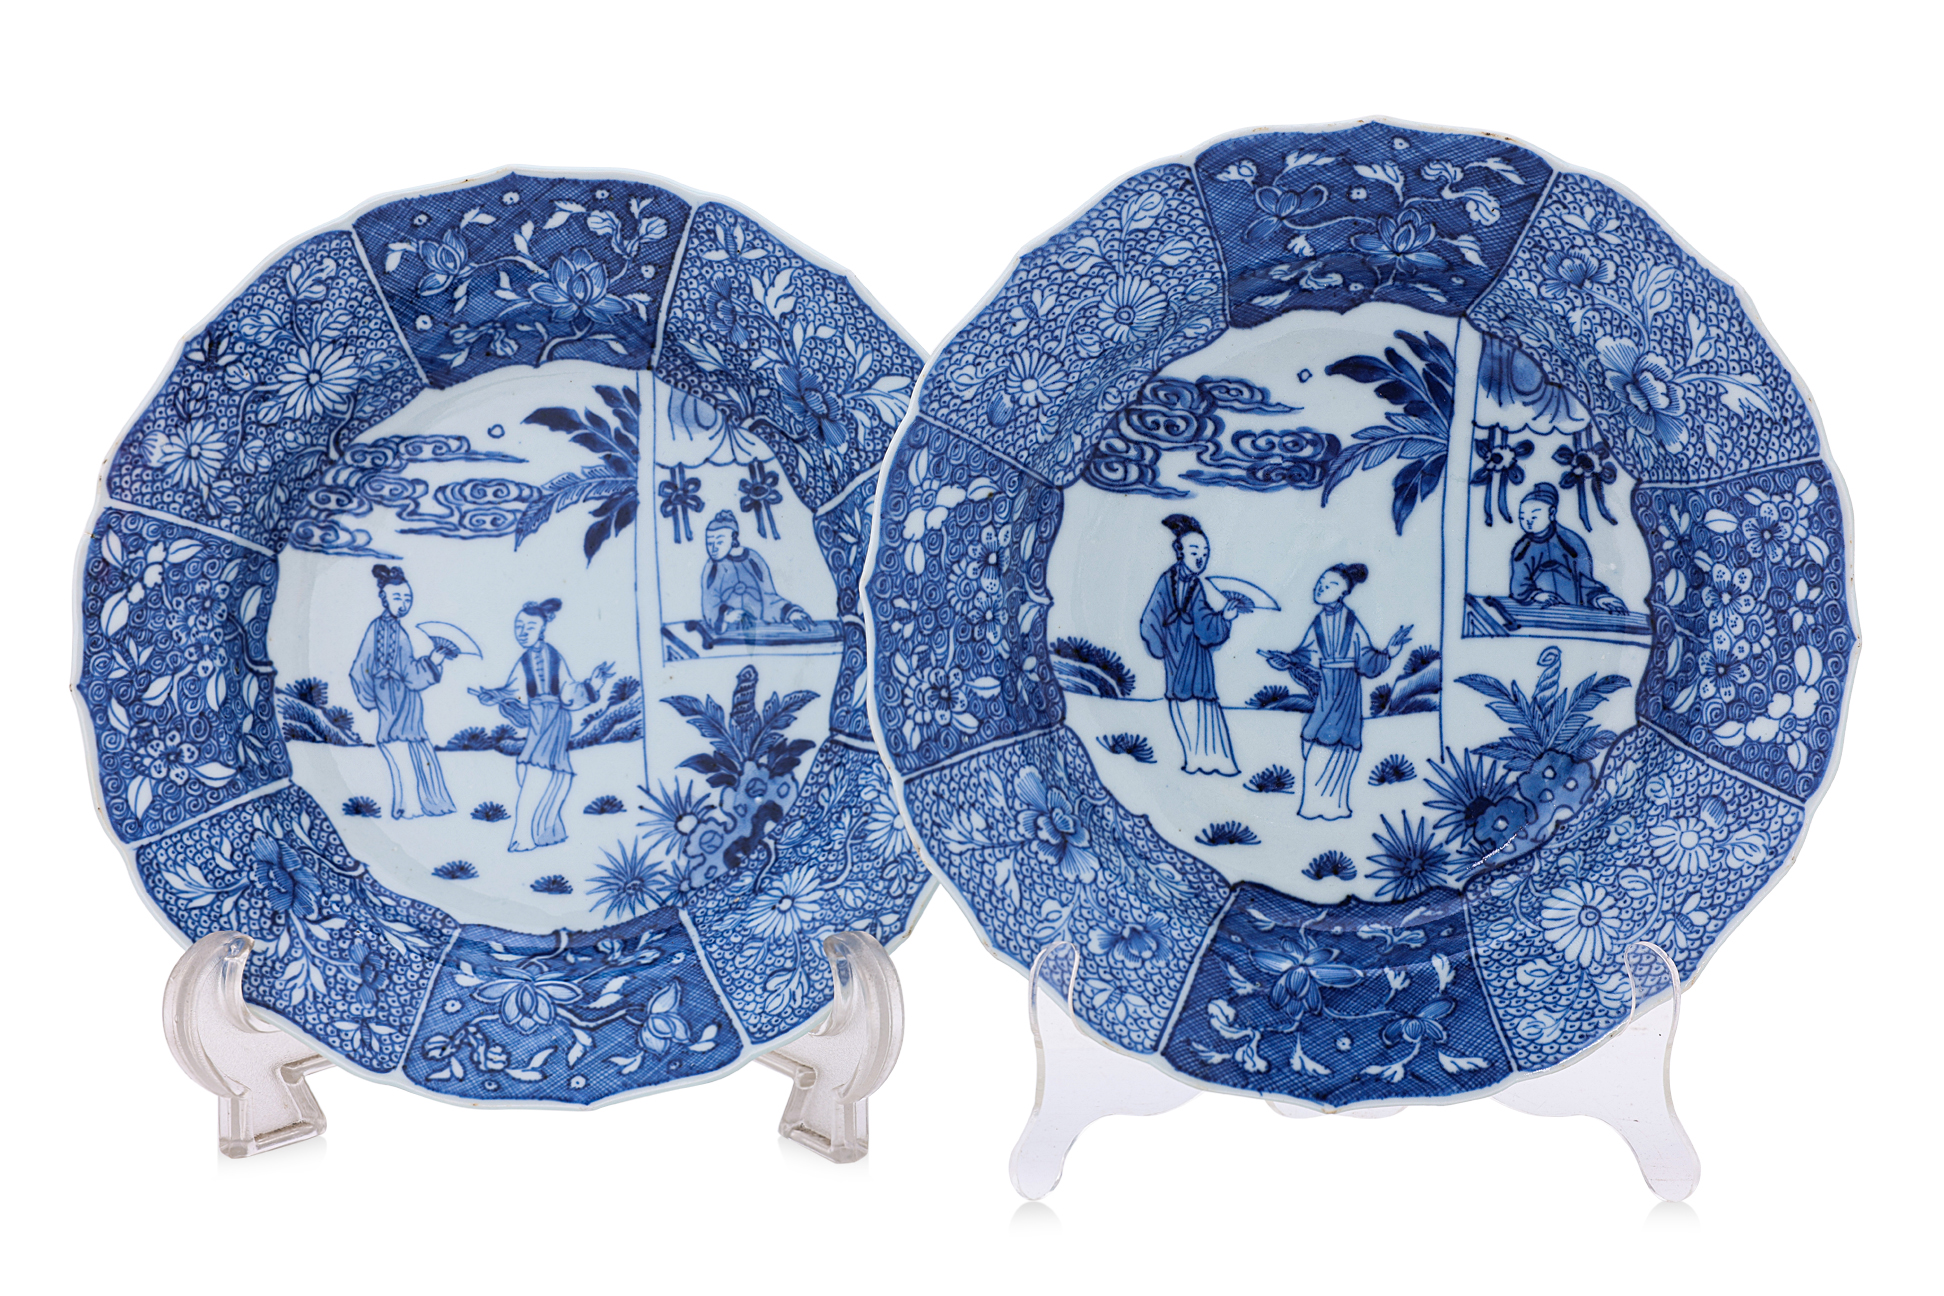 A PAIR OF BLUE AND WHITE PORCELAIN SOUP PLATES